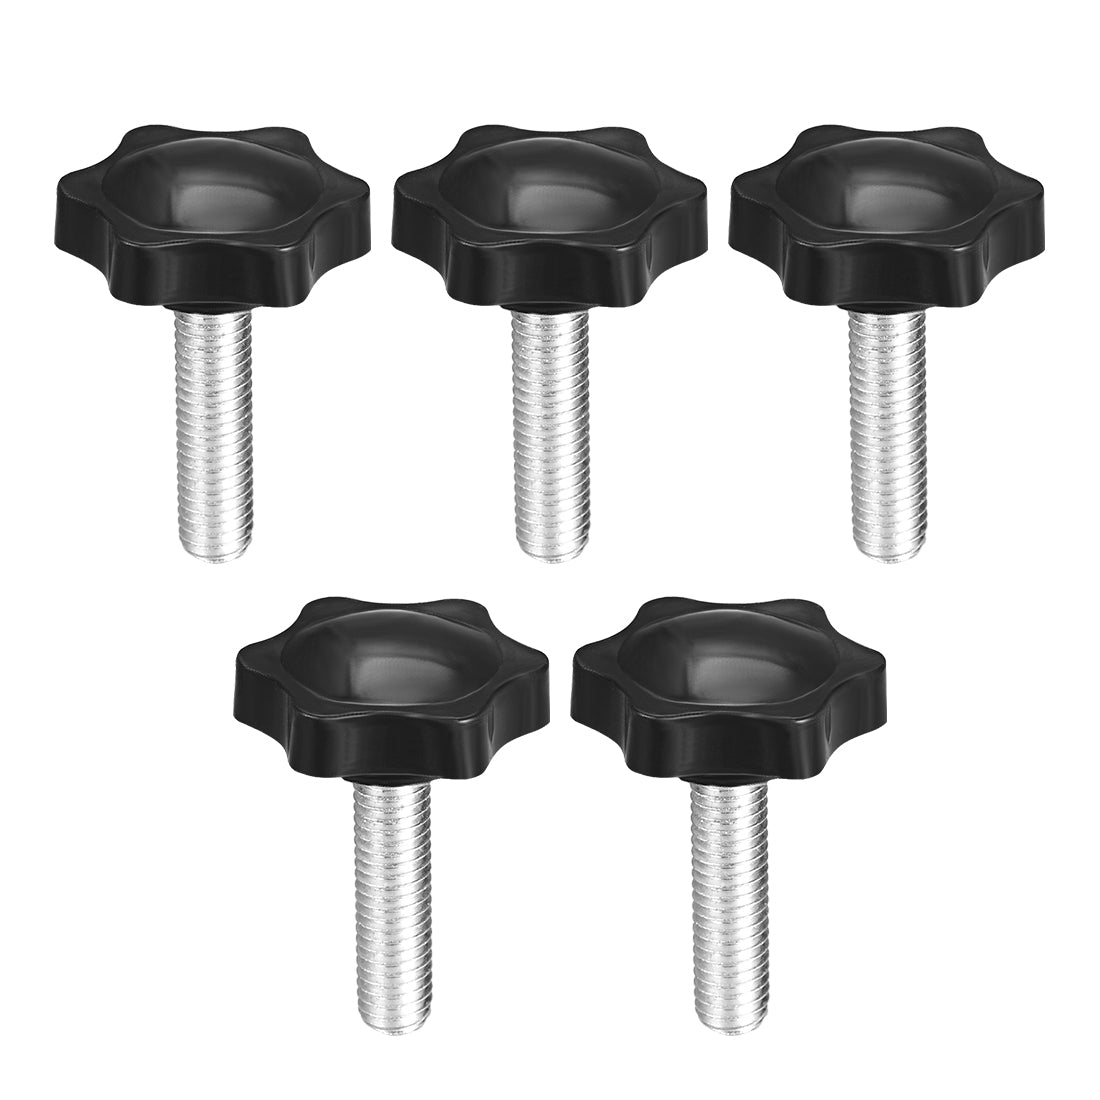 uxcell Uxcell Clamping Screw Knob Dia Plum Hex Shaped Grips Star Knob Male Thread 5pcs